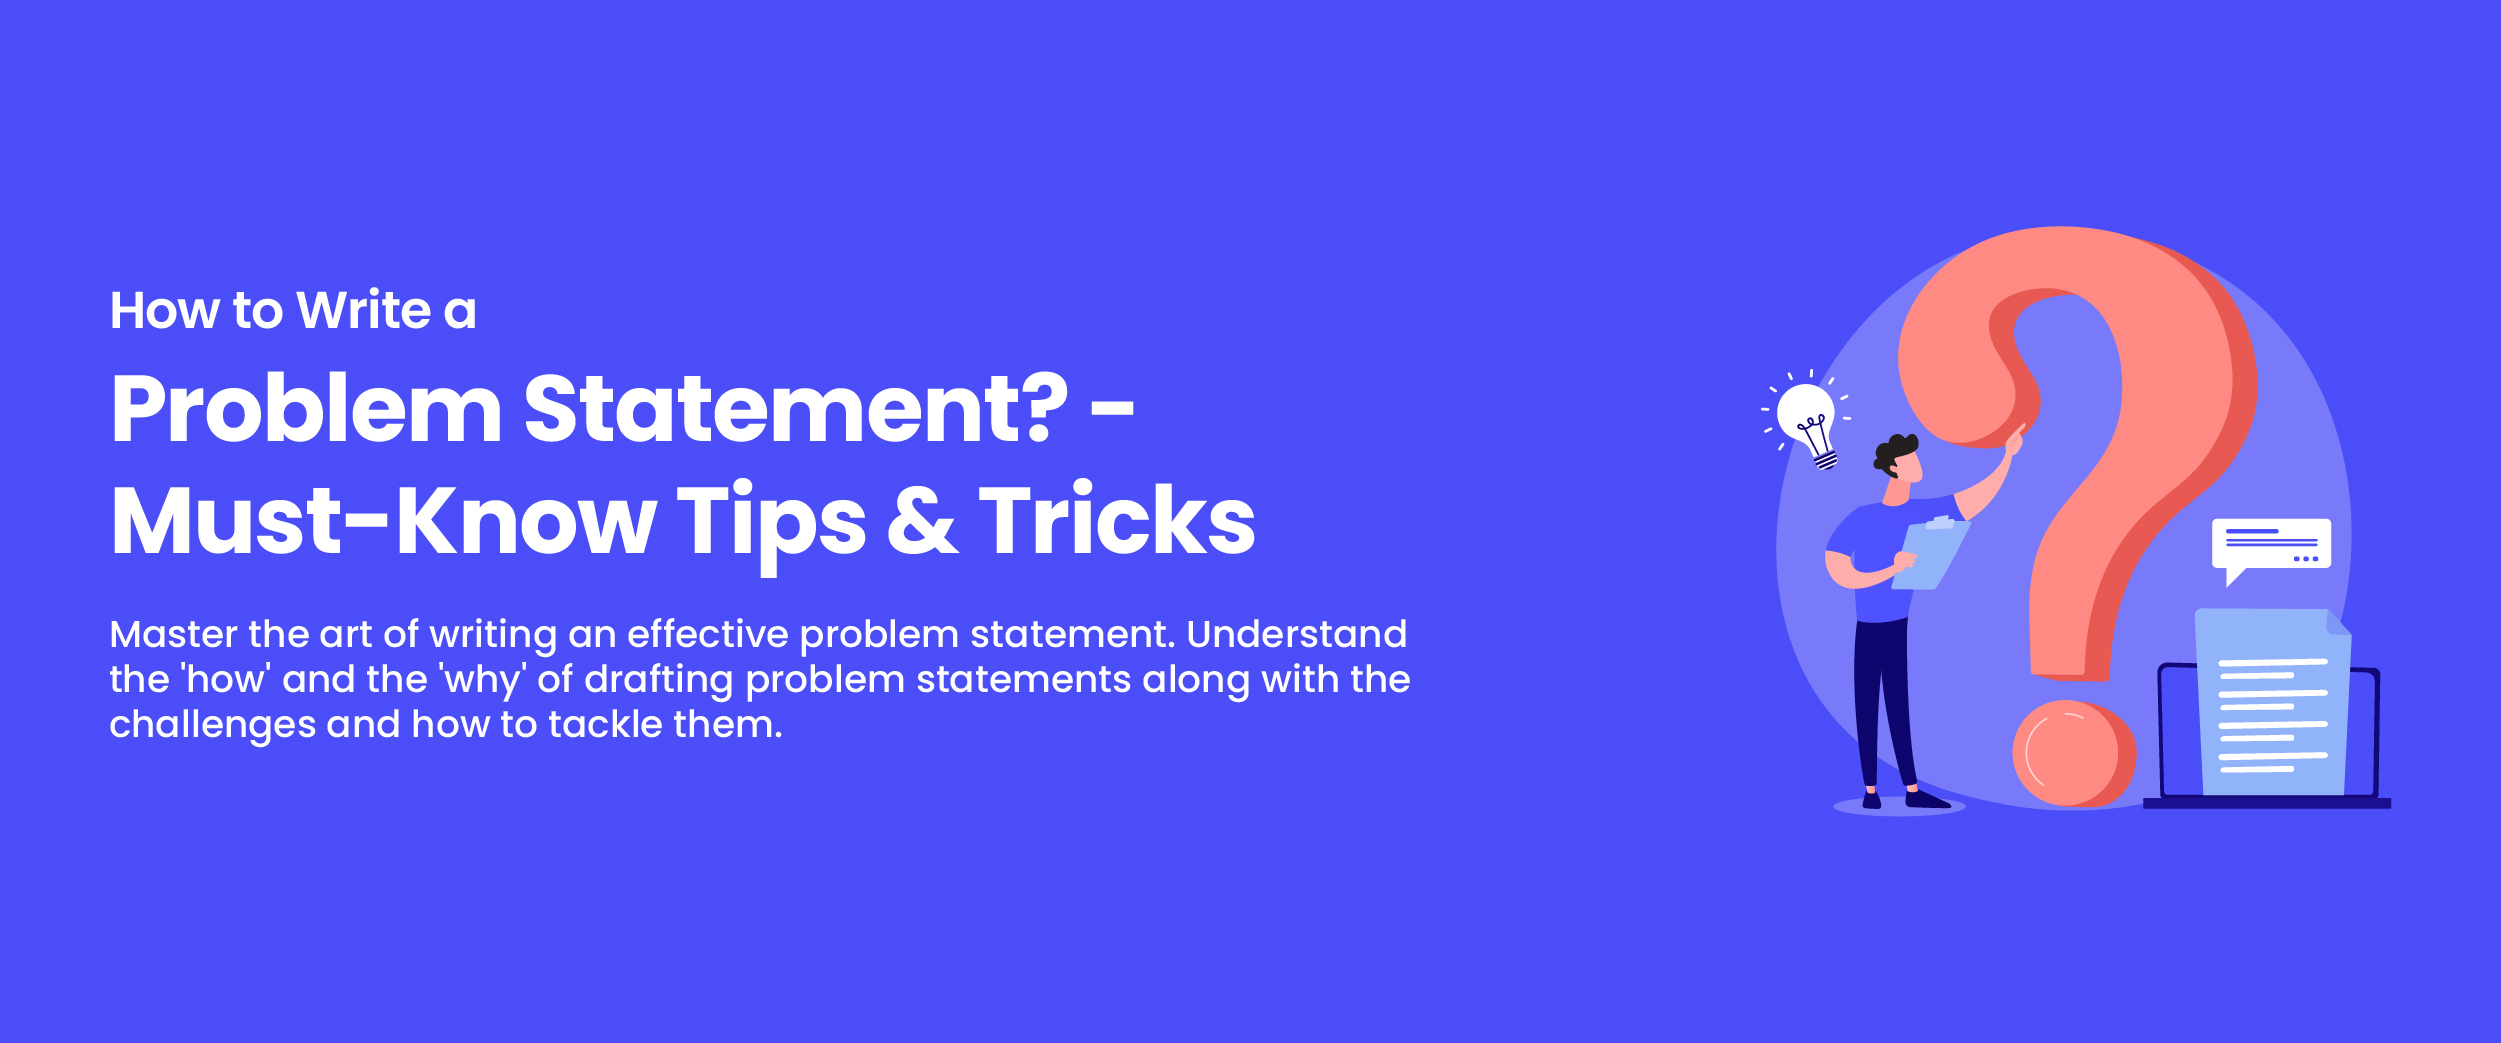 How to Write a Problem Statement? - Must-Know Tips & Tricks